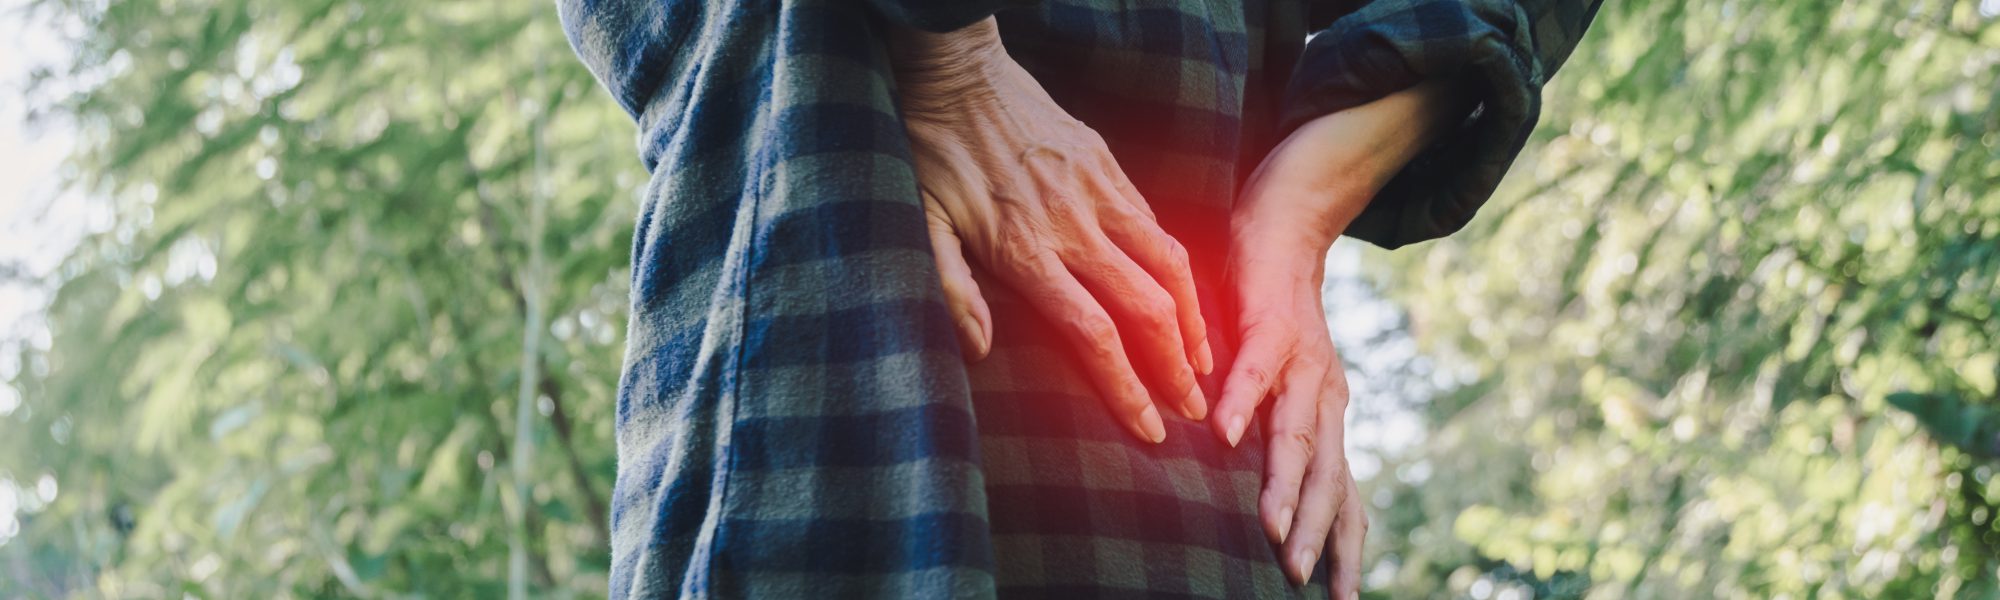 Closeup hands of woman touching her back pain in healthy concept